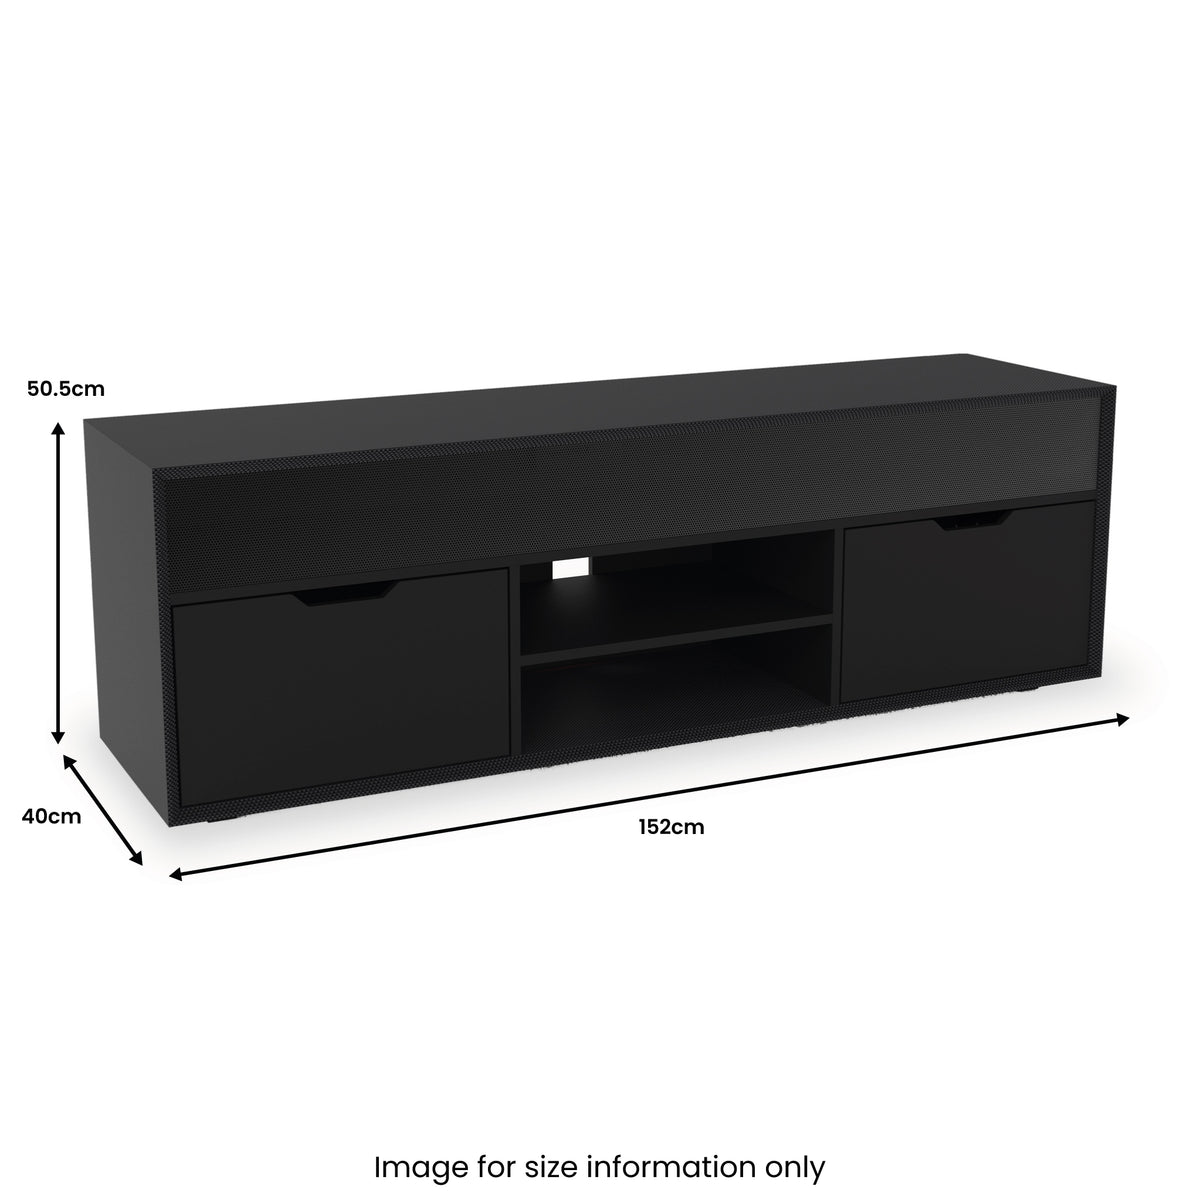 Koble Shadow Gaming TV Unit dimensions